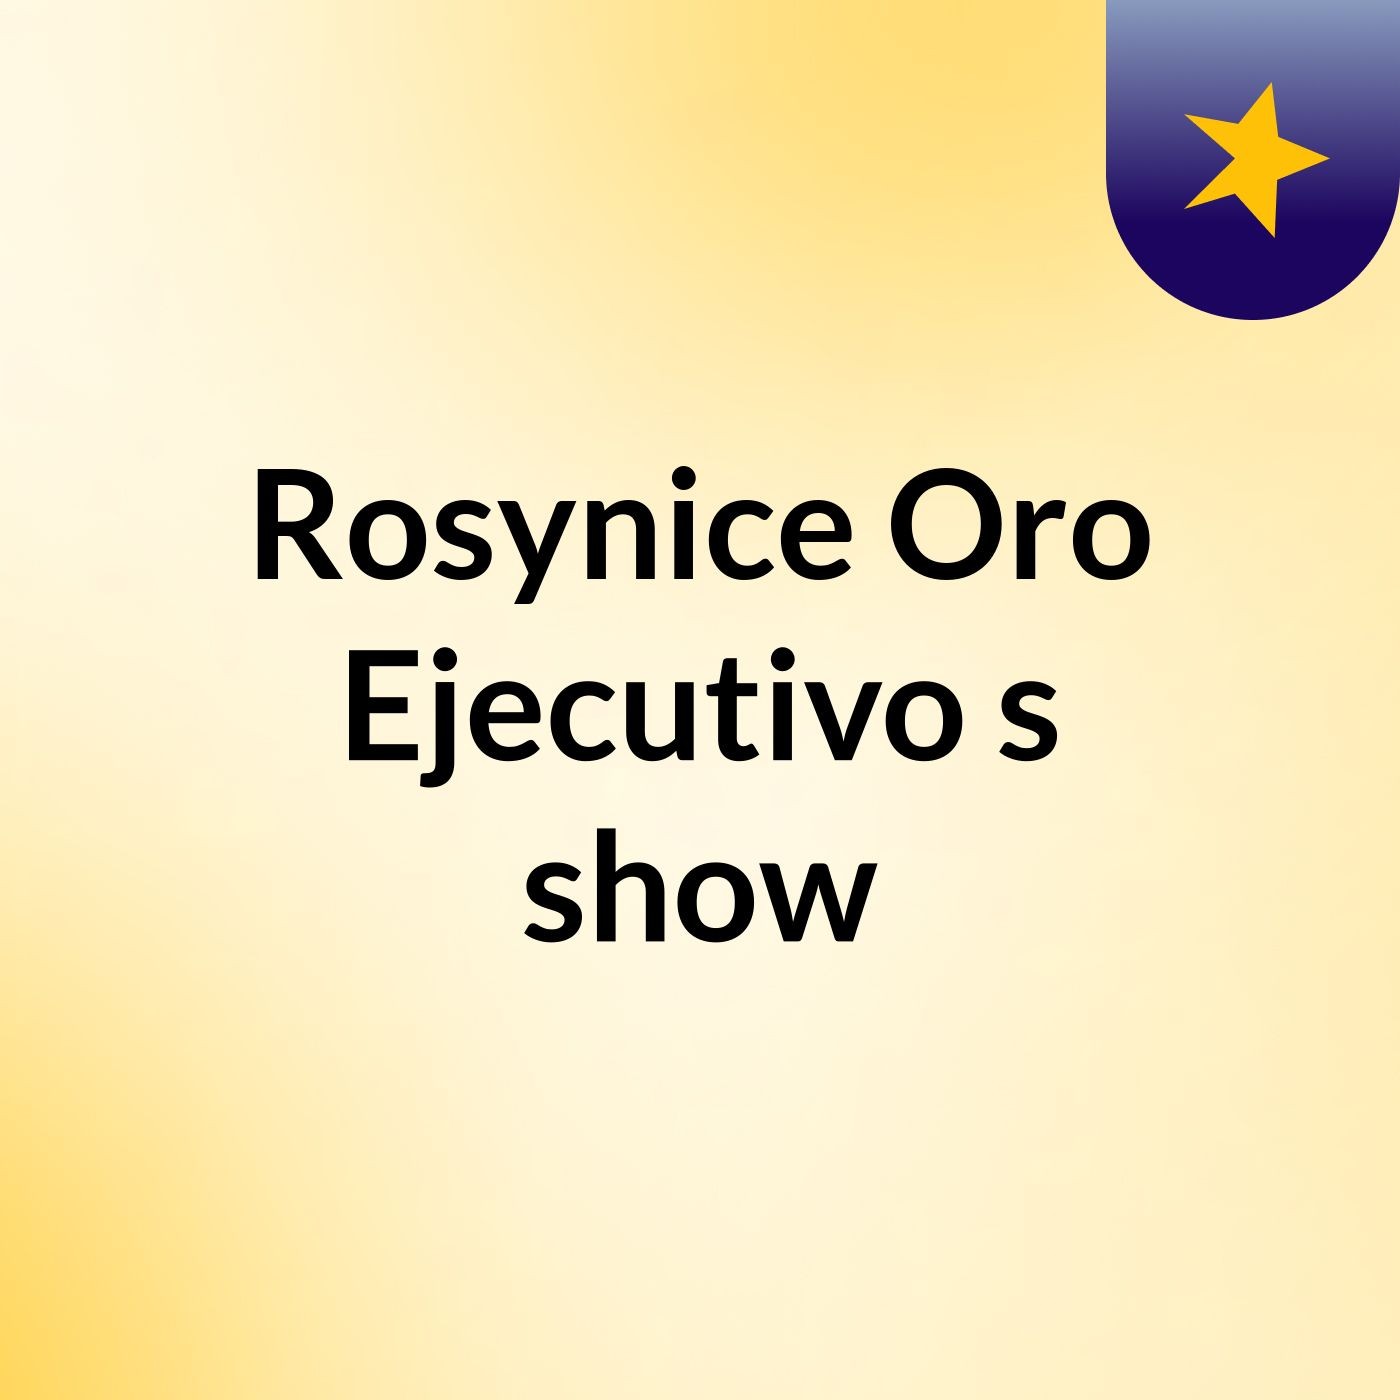 Rosynice Oro Ejecutivo's show